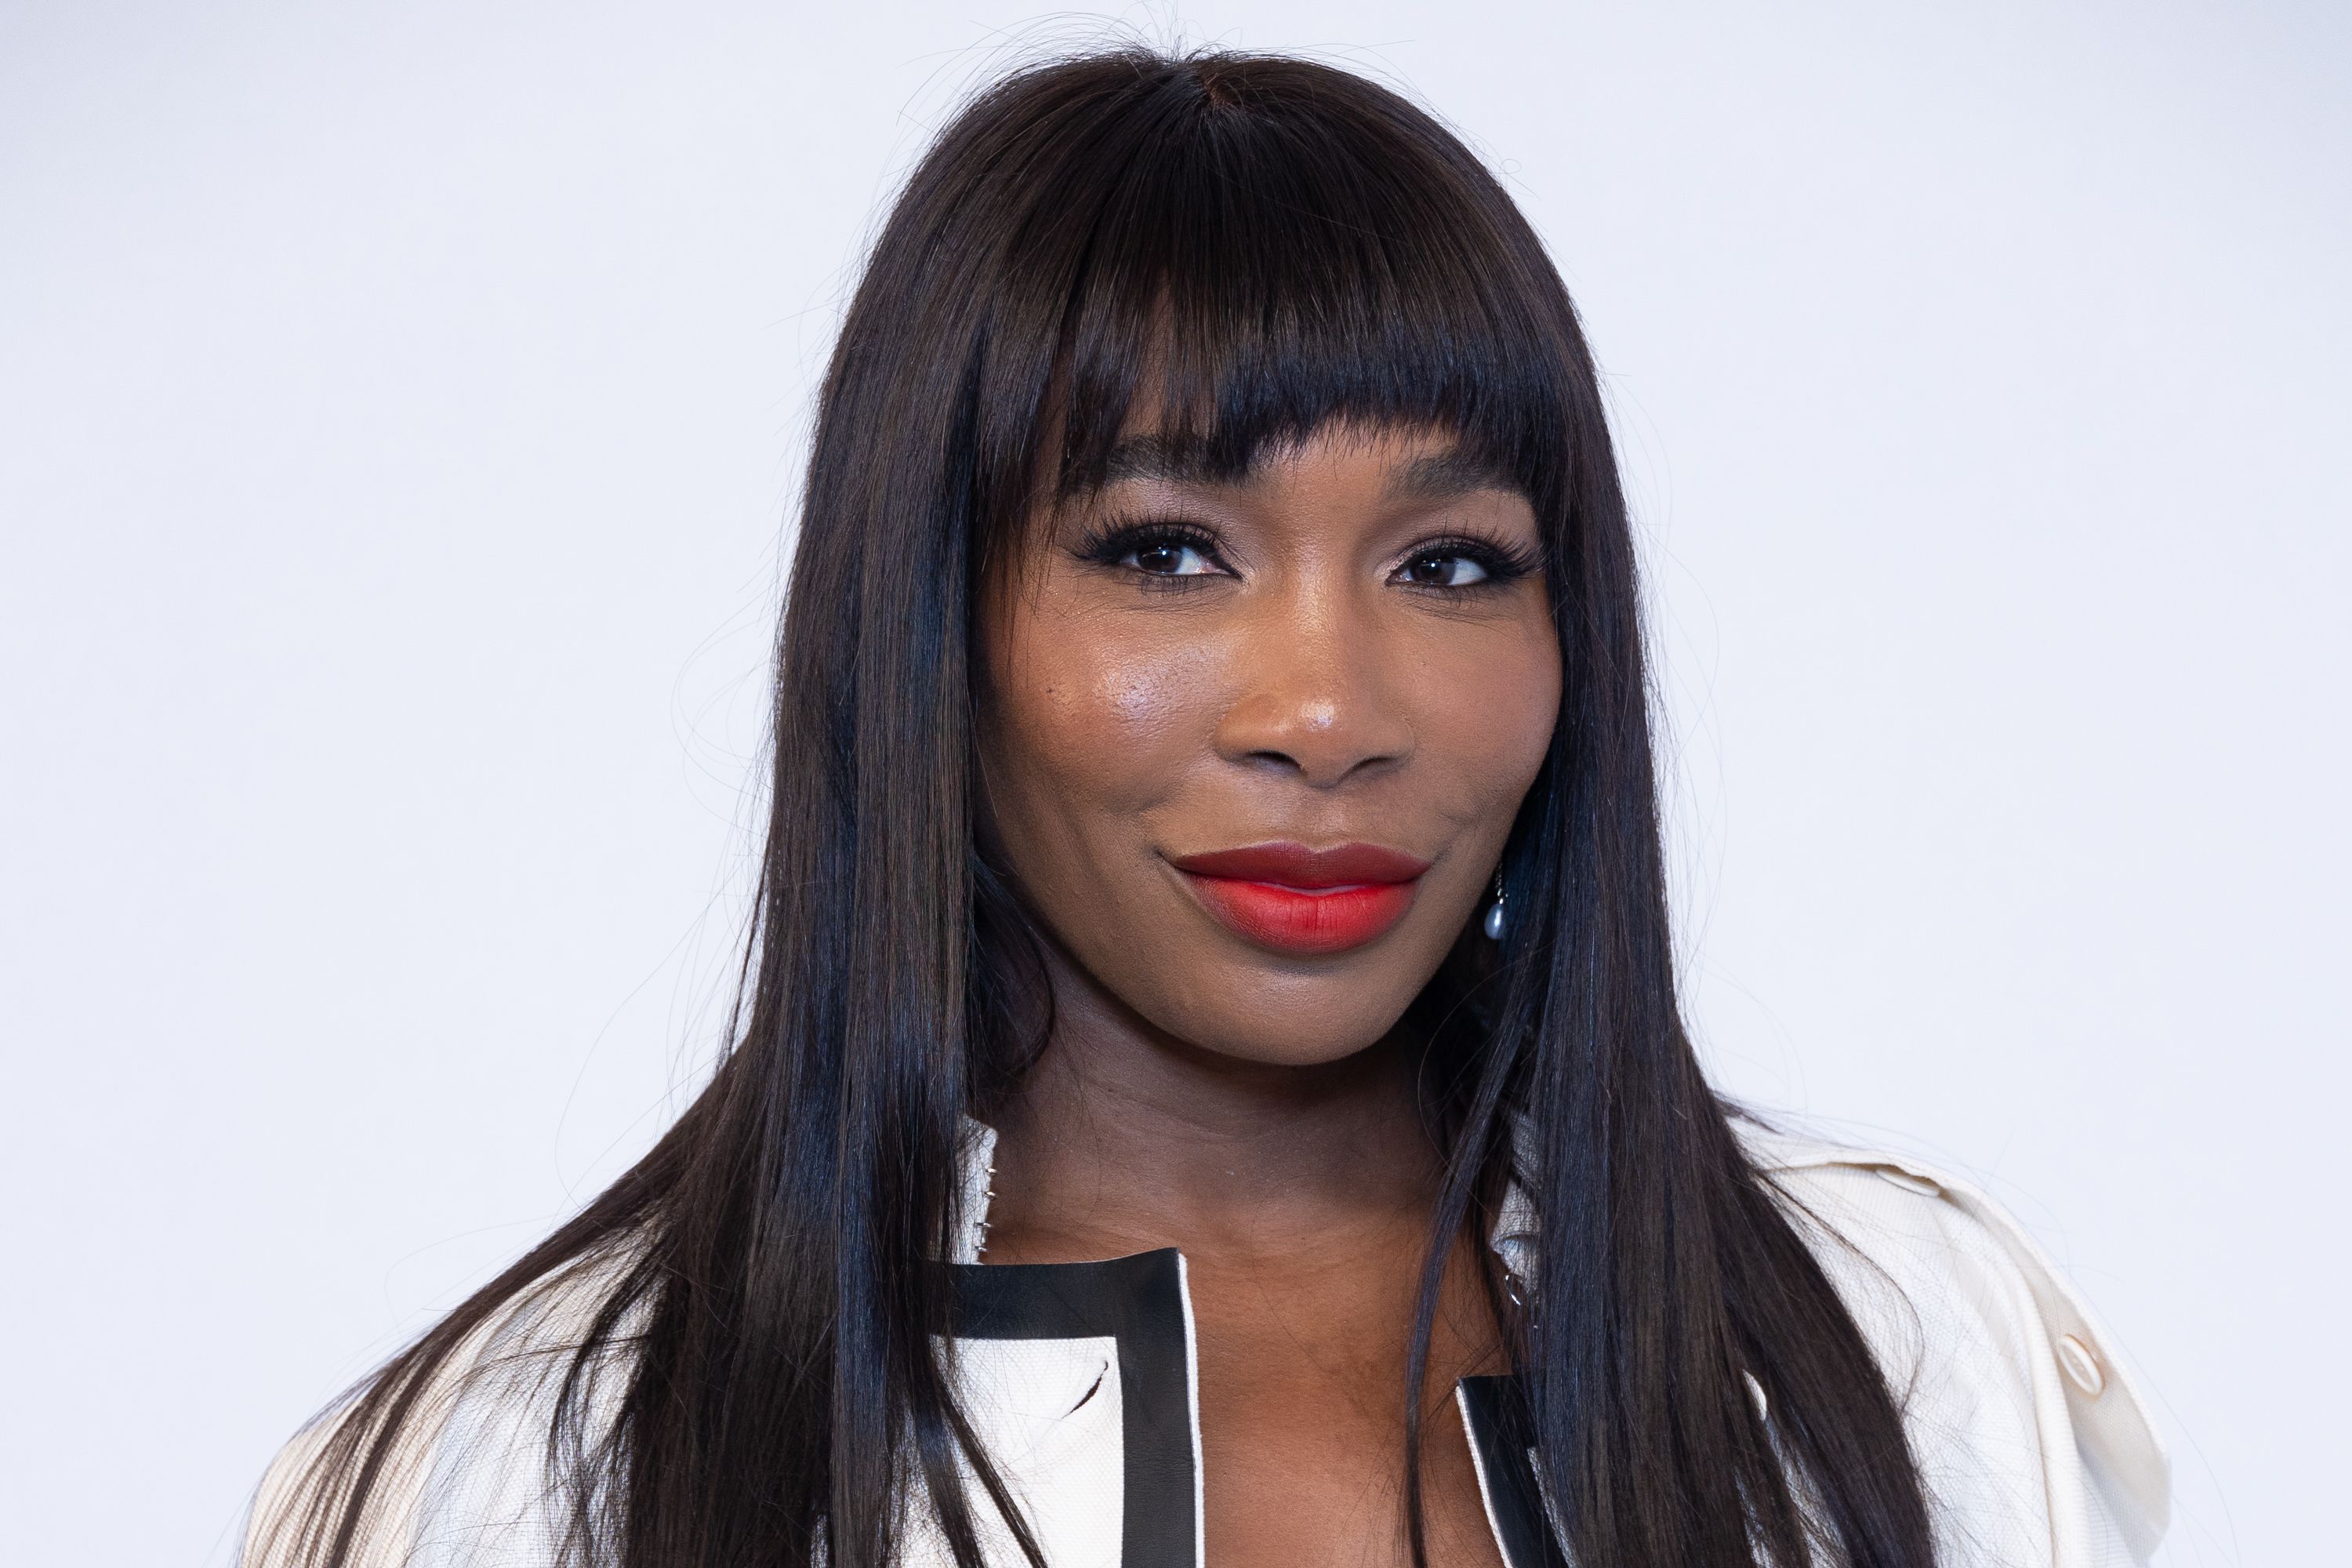 Venus Williams Flaunts Butt In Leather Pants In New Instagram Photo